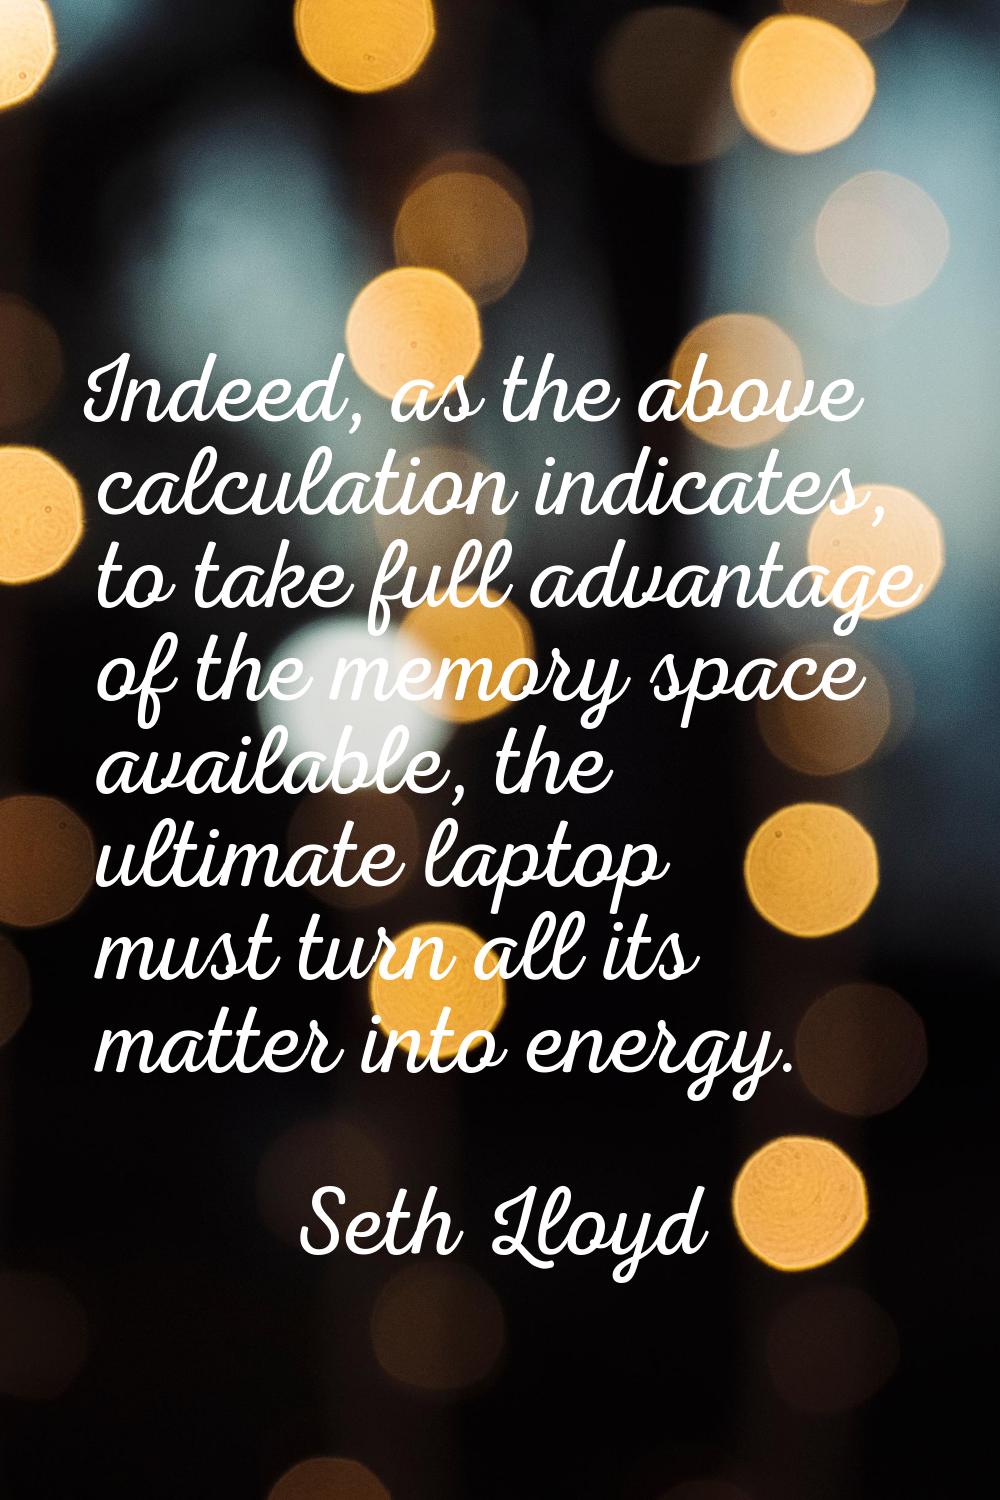 Indeed, as the above calculation indicates, to take full advantage of the memory space available, t